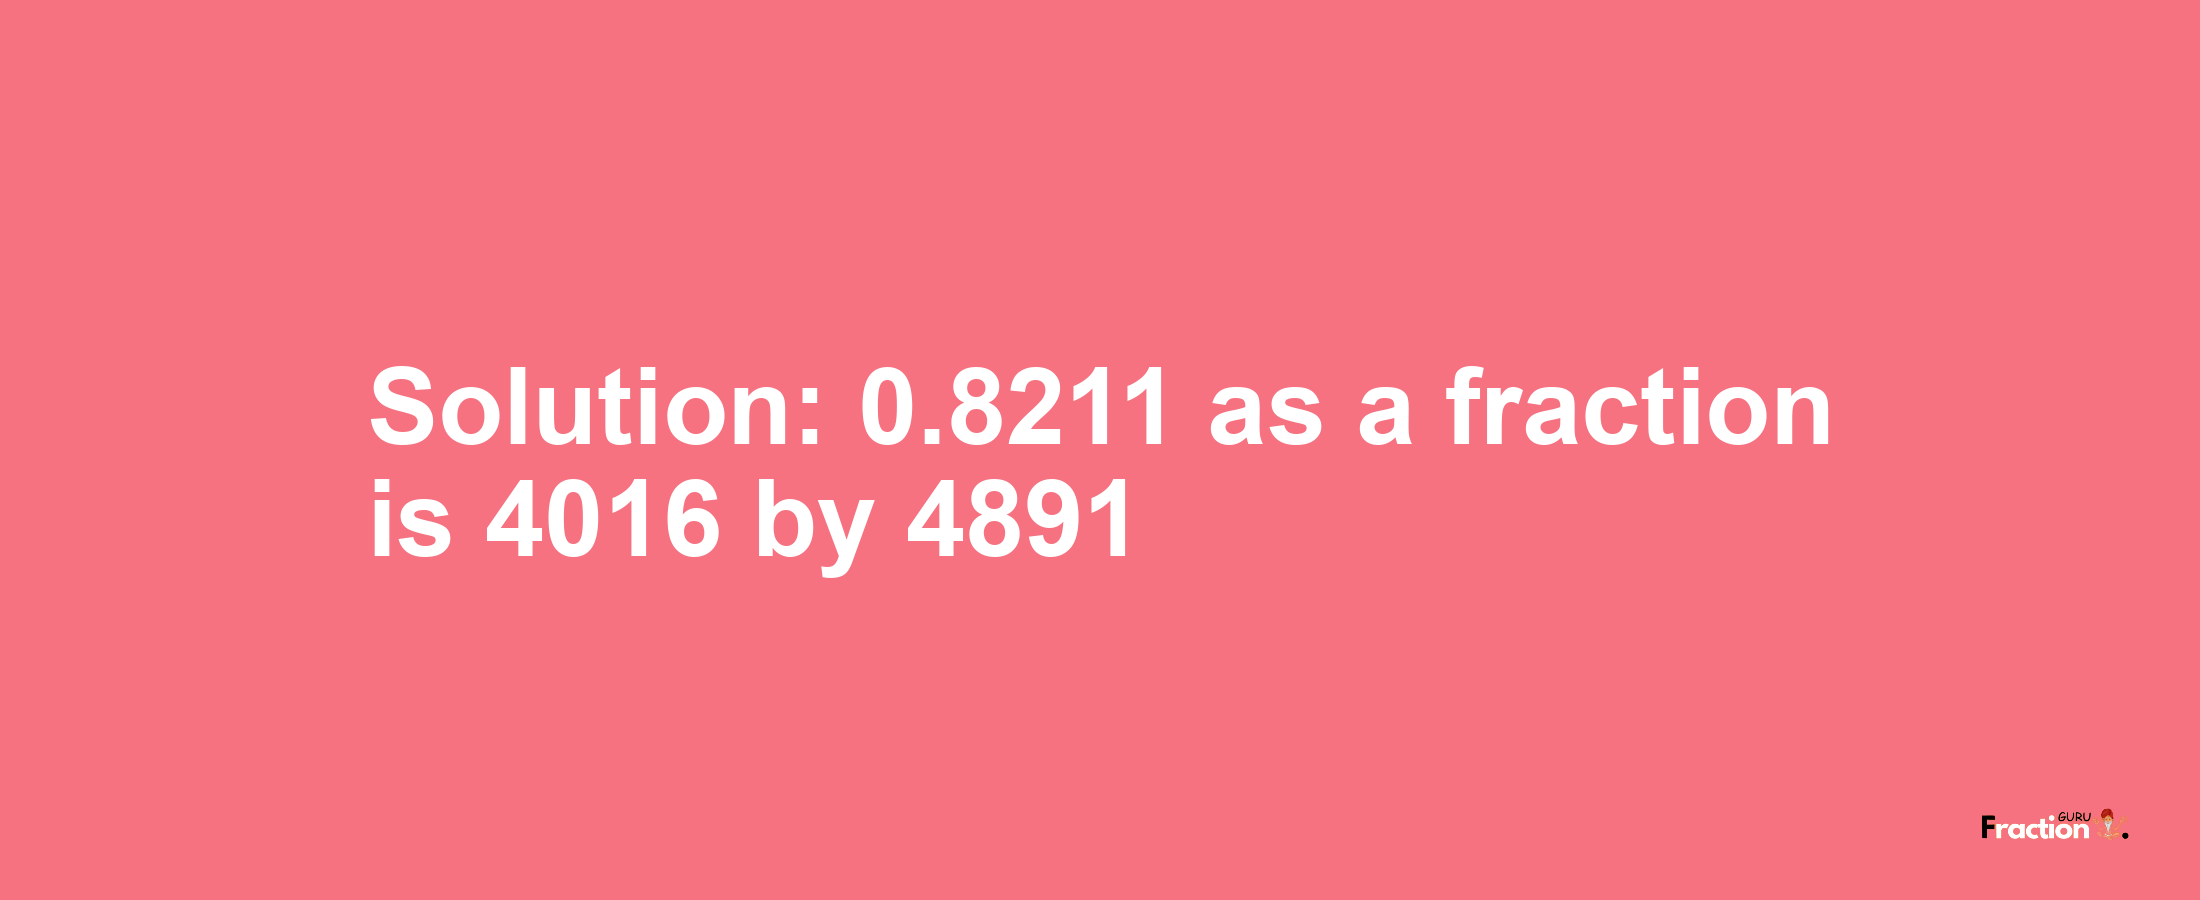 Solution:0.8211 as a fraction is 4016/4891